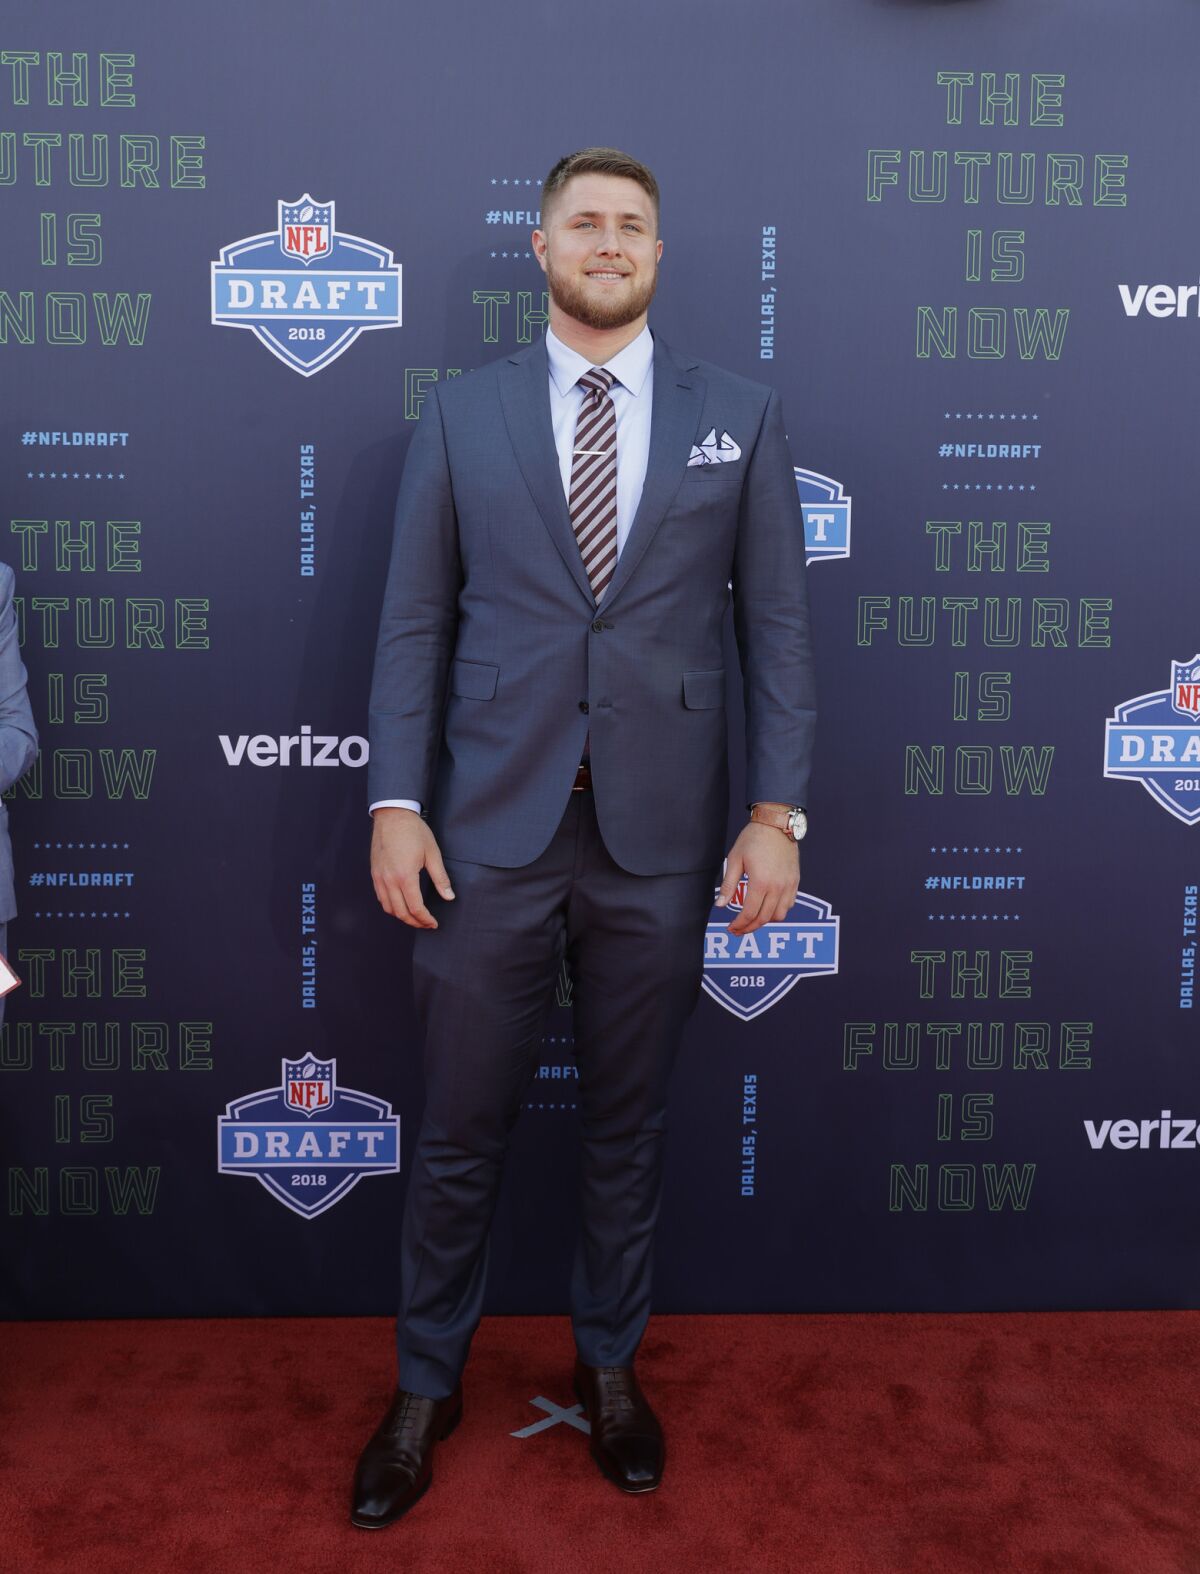 UCLA's Kolton Miller poses for photos on the red carpet.